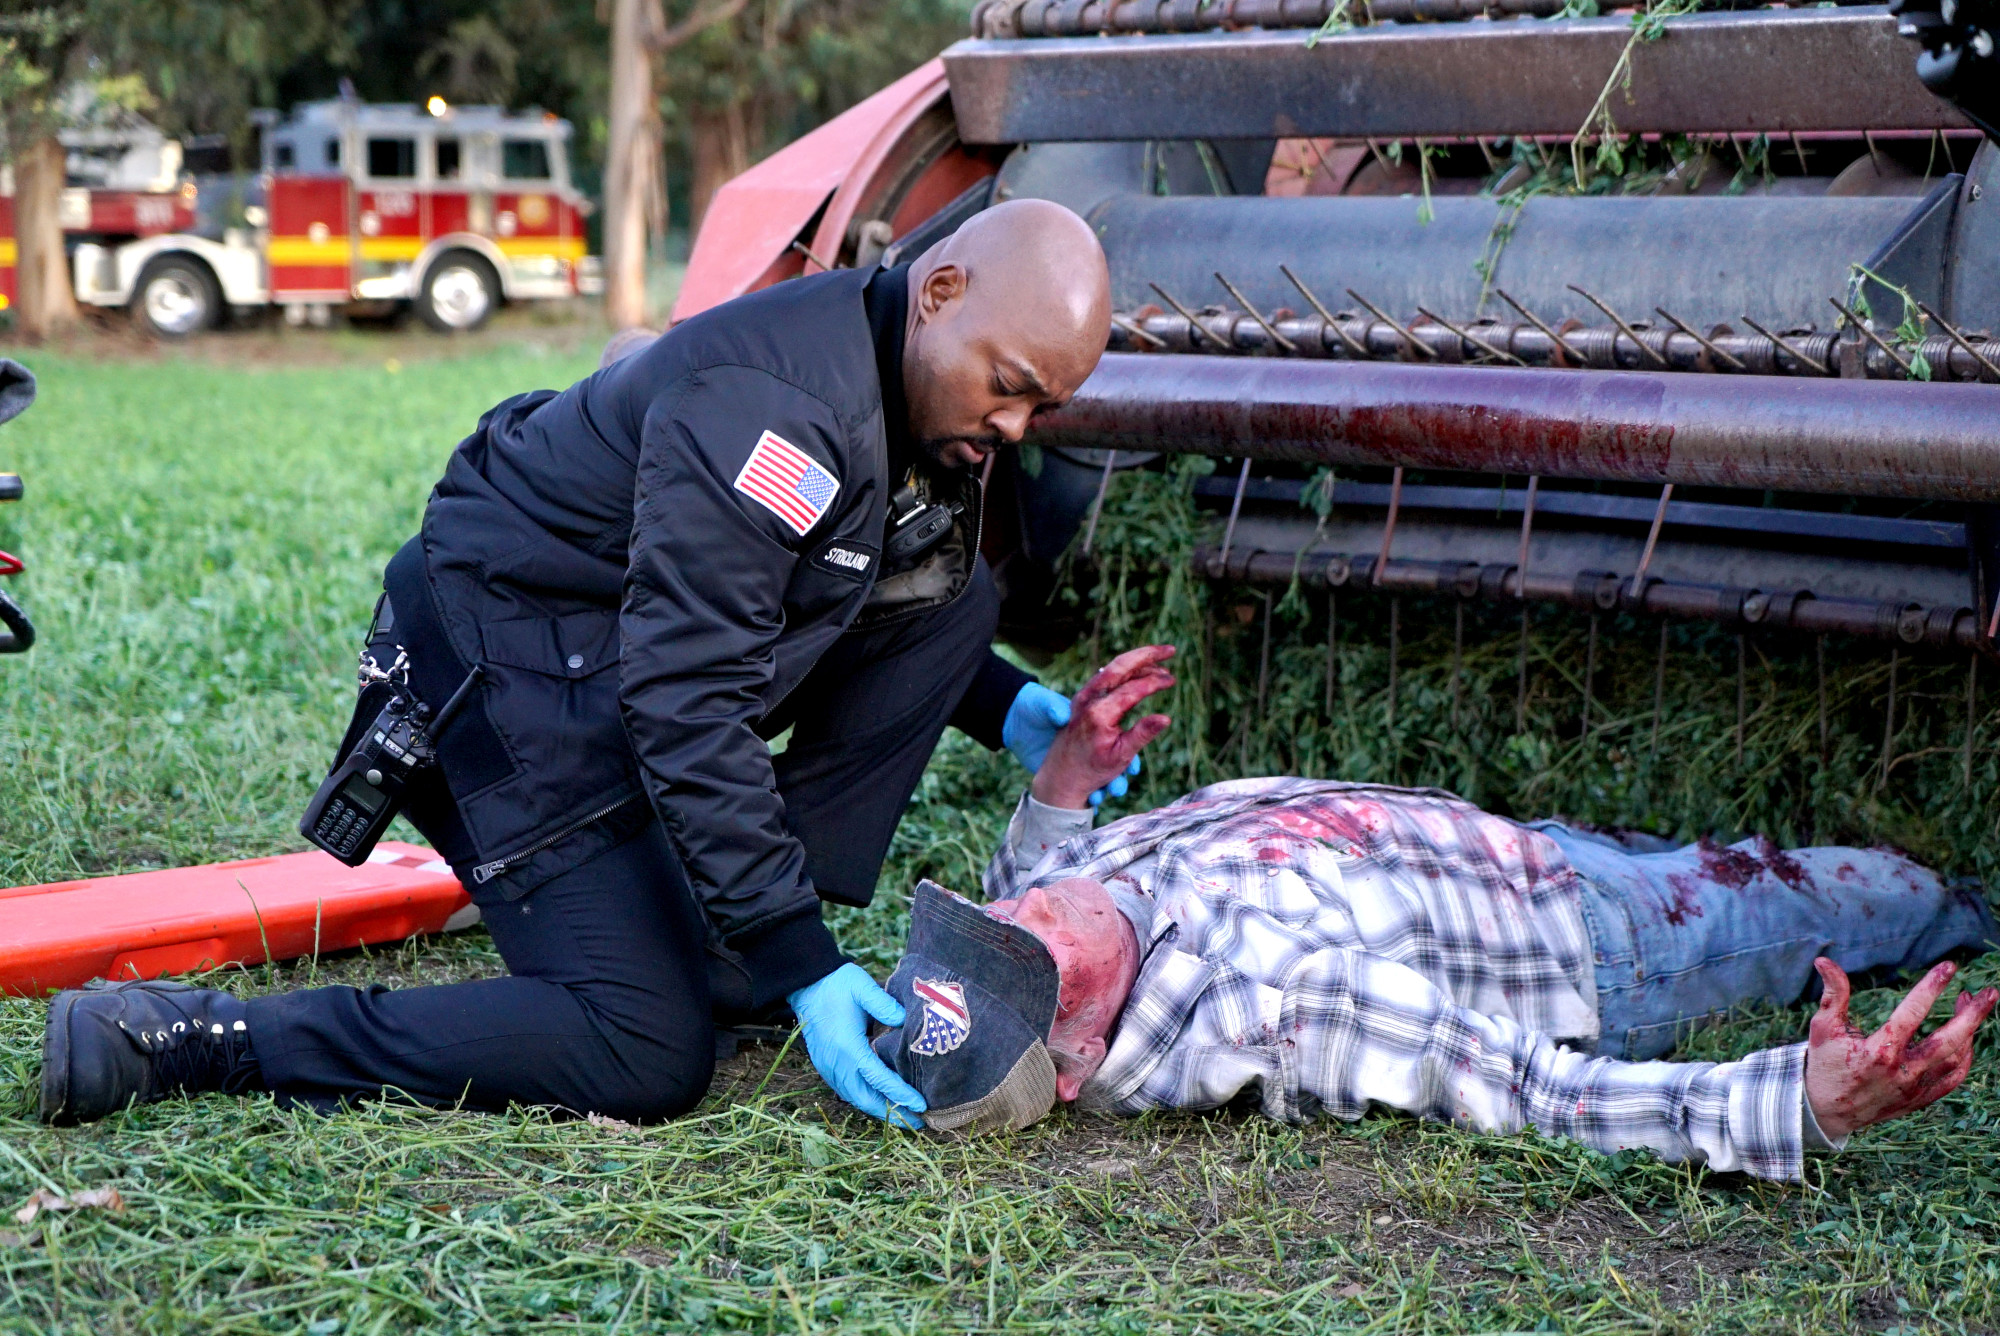 9-1-1: LONE STAR: L-R: Brian Michael Smith and guest star Tahmus Rounds in the “Friends Like These” episode of 9-1-1: LONE STAR airing Monday, Feb. 17 (8:00-9:01 PM ET/PT) on FOX. ©2020 Fox Media LLC. CR: Kevin Estrada/FOX.